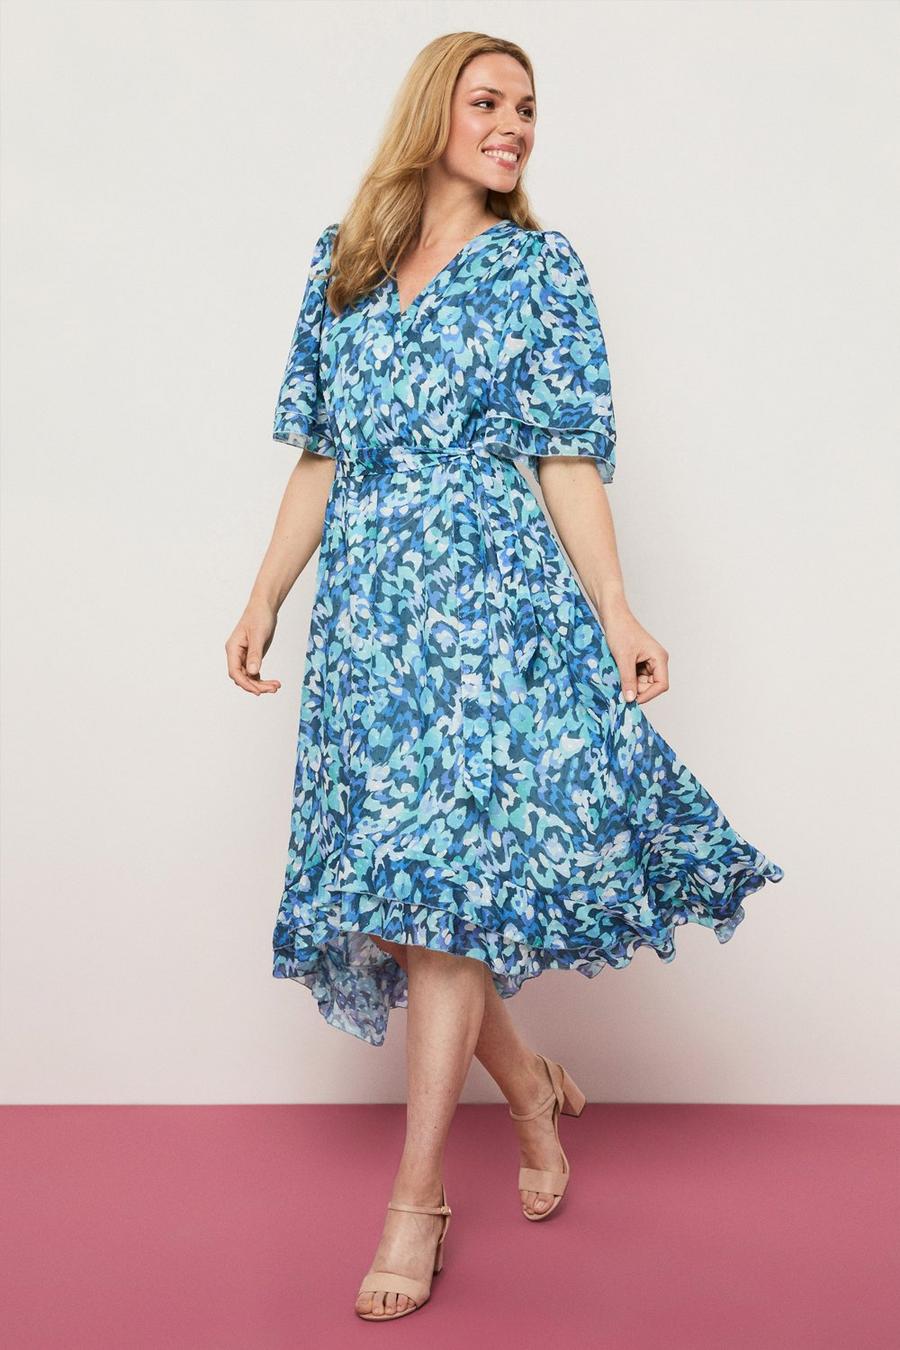 New! Wallis Dress Size 14-18Green Floral Fit and Flare£45 RRPBNWT 